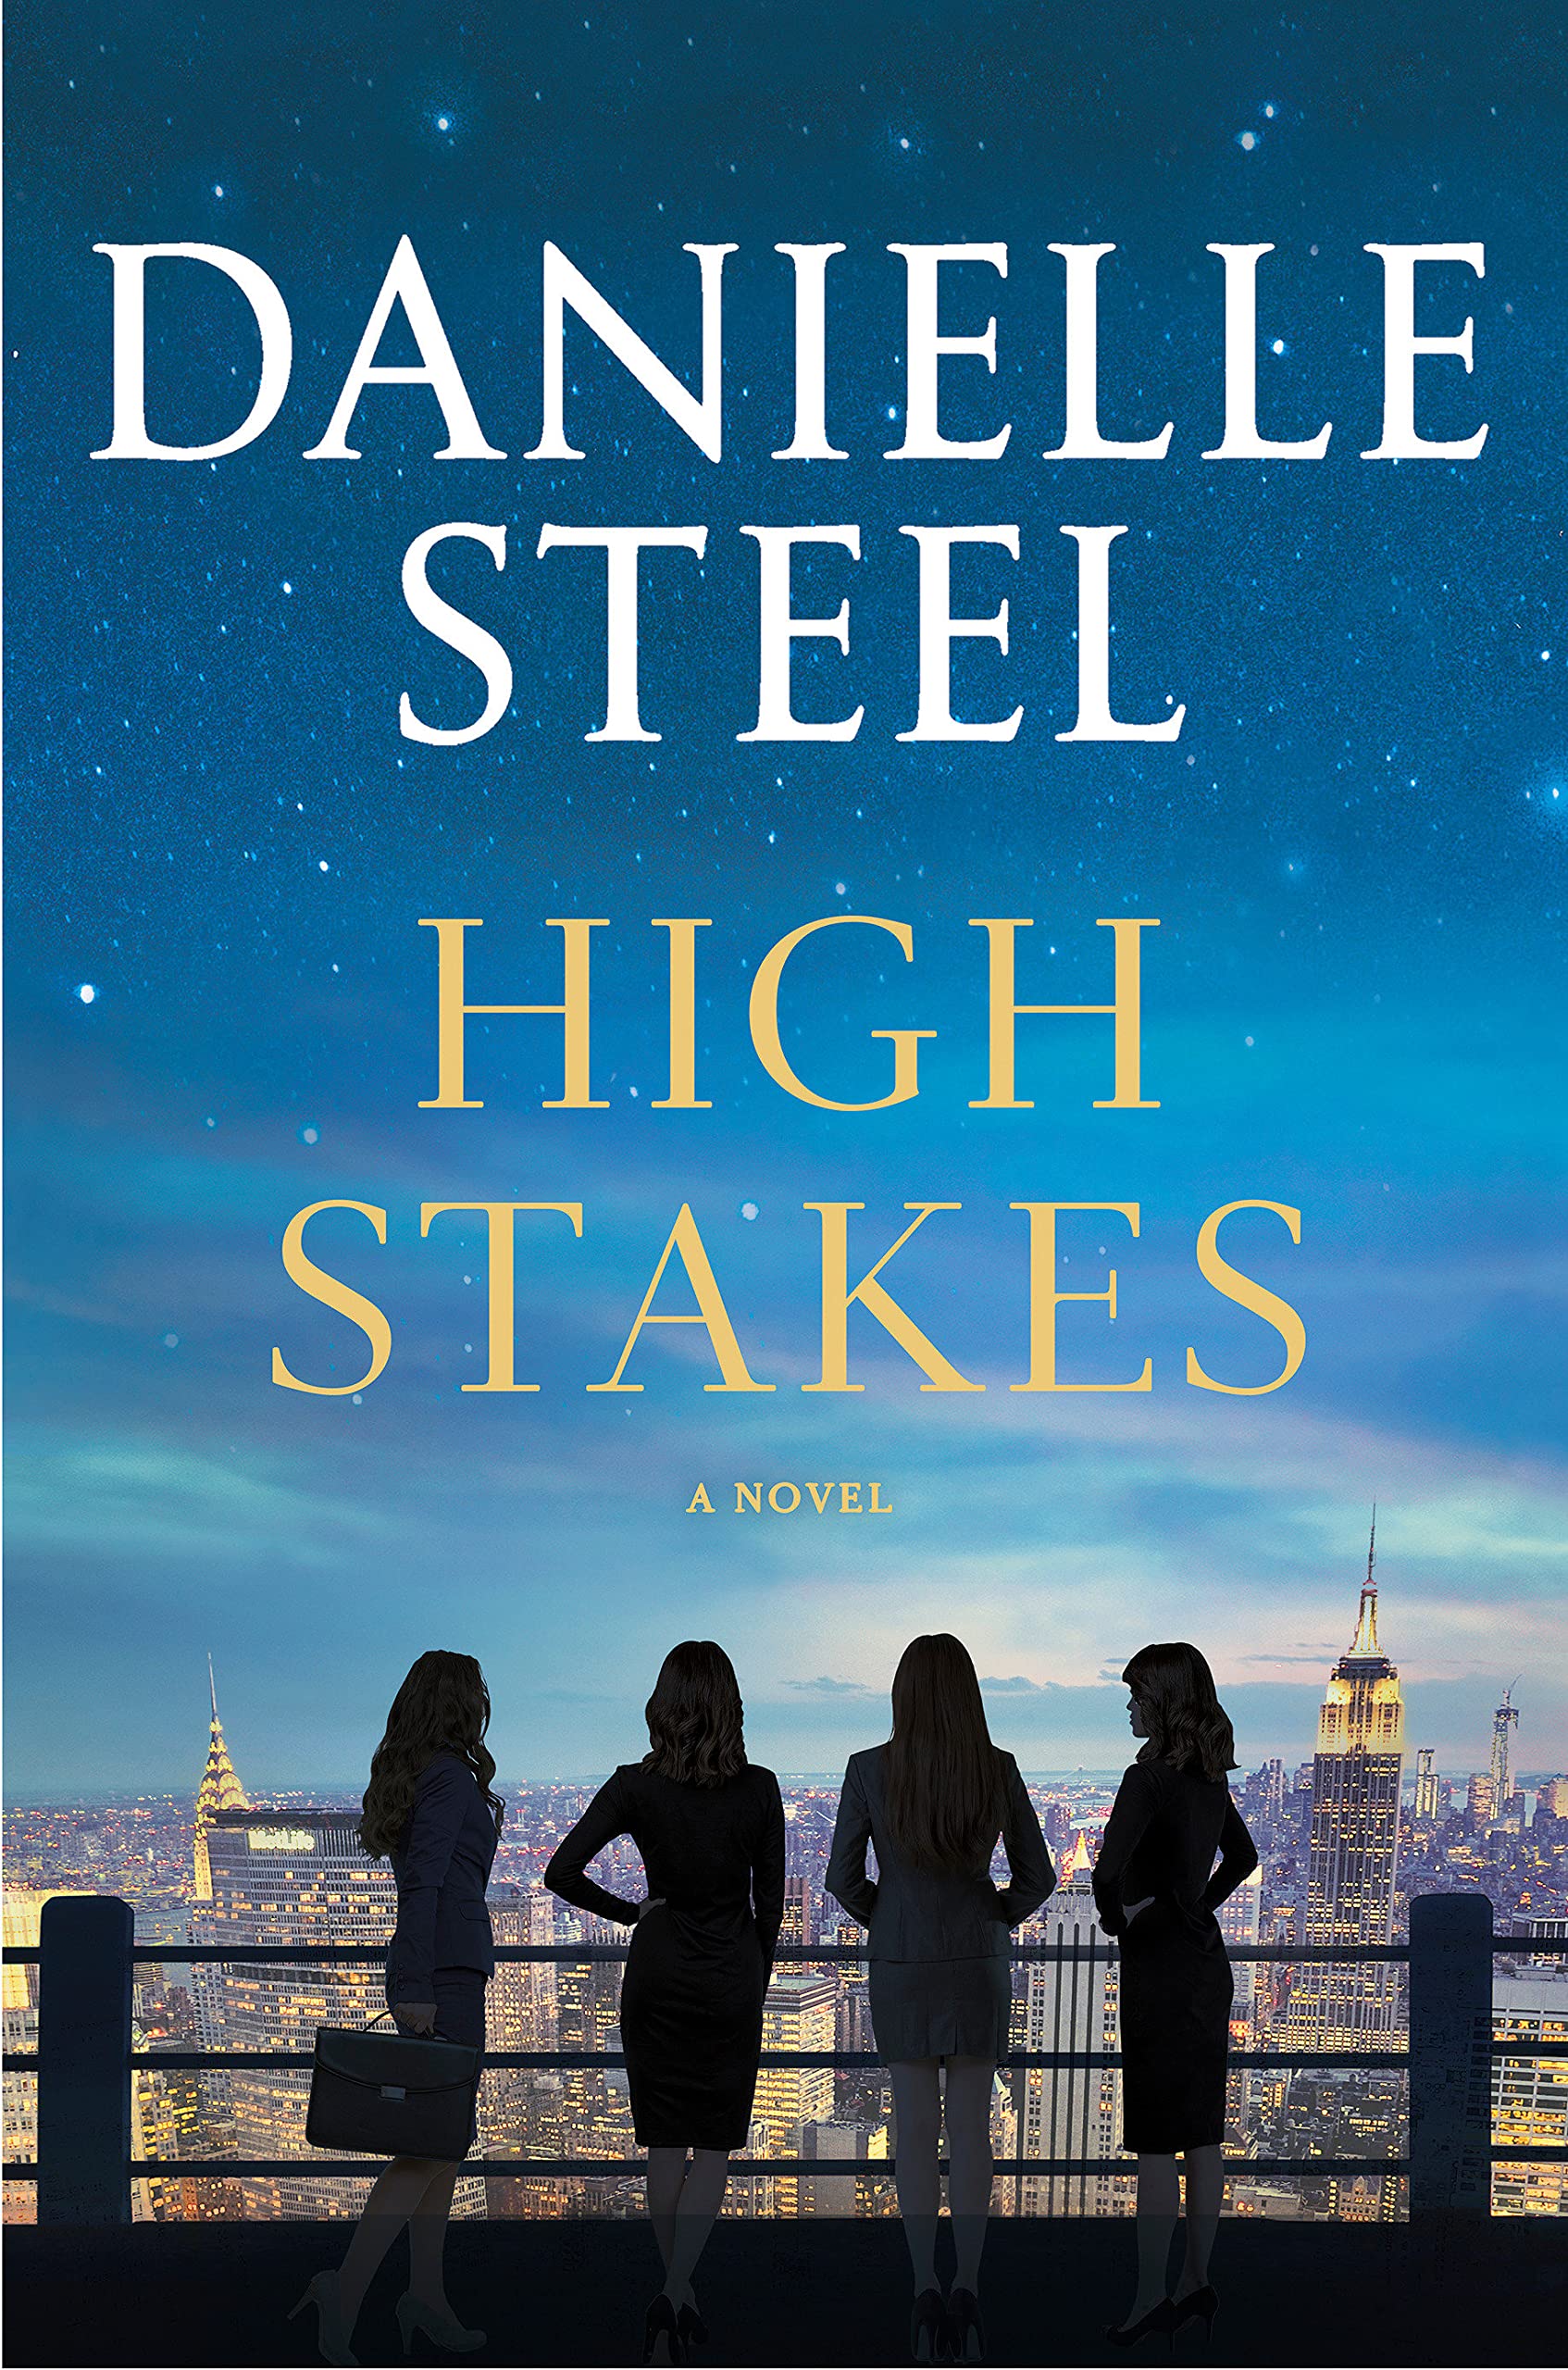 Image for "High Stakes"